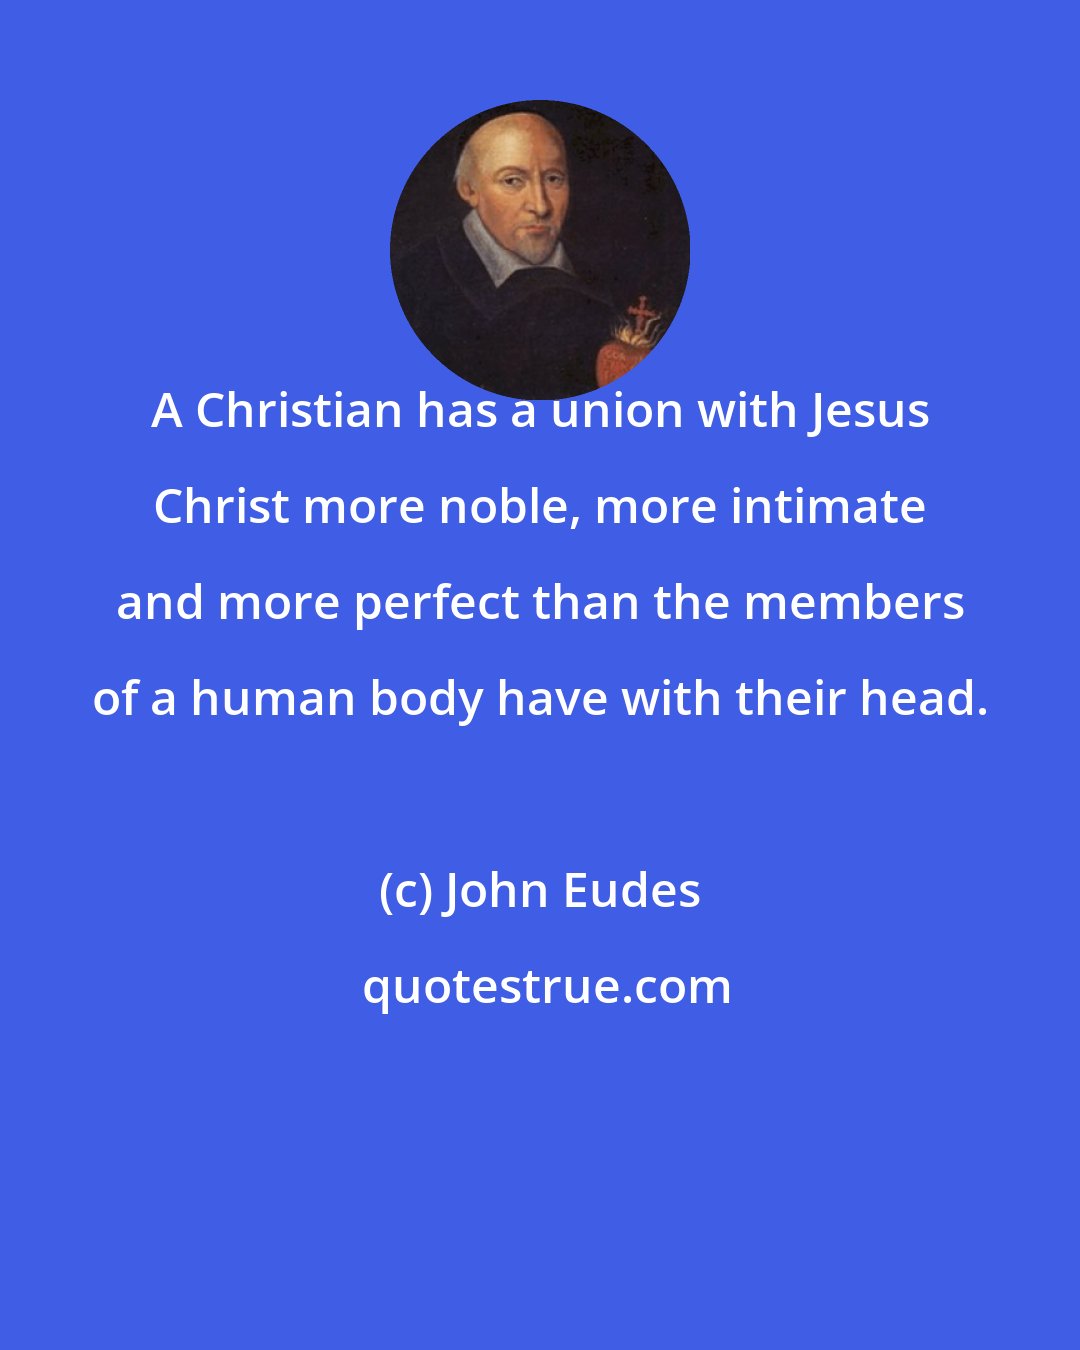 John Eudes: A Christian has a union with Jesus Christ more noble, more intimate and more perfect than the members of a human body have with their head.